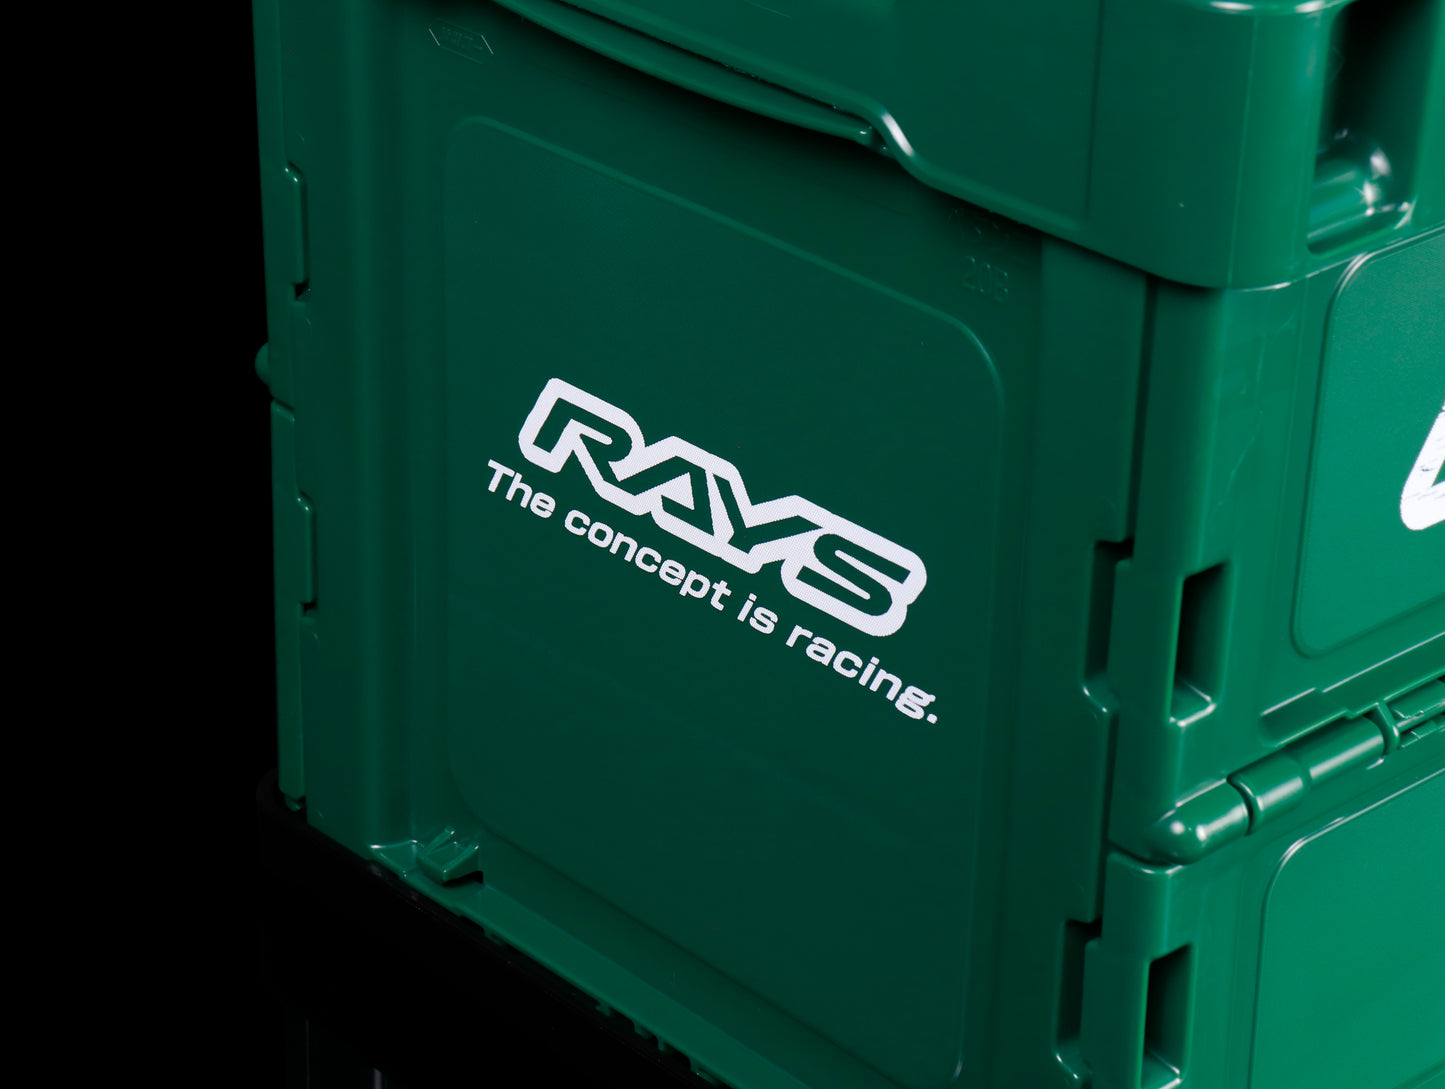 Rays Official Folding Storage Box Container